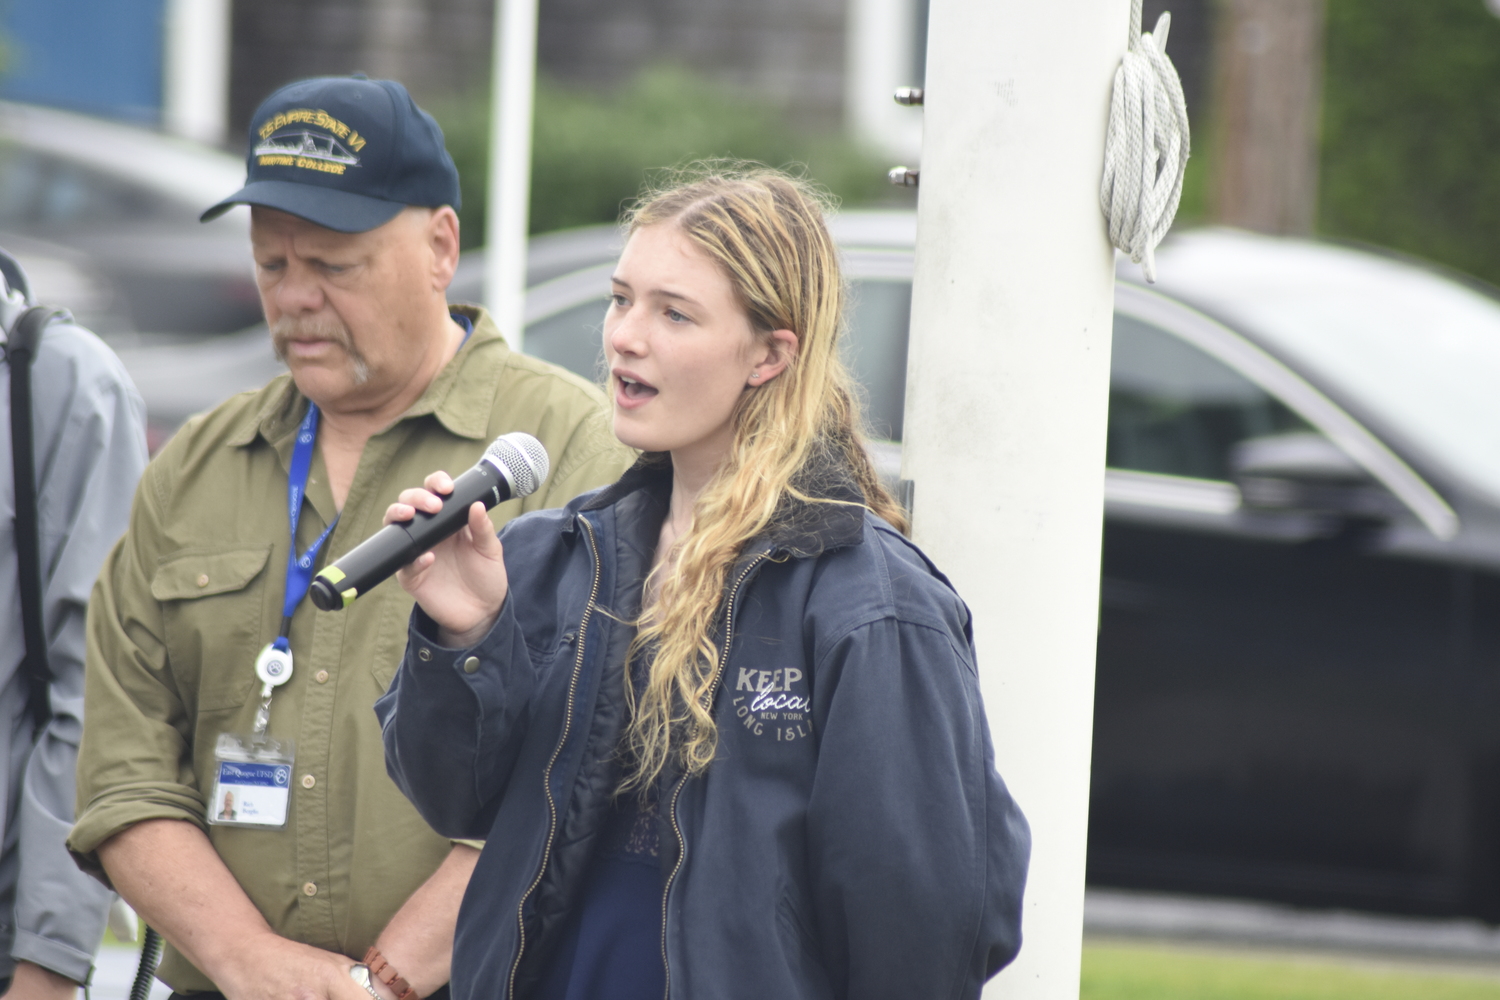 Rosalie Judd, a Westhampton Beach senior who graduated from East Quogue Elementary, sang this year's national anthem just prior to the start of this year's race.   DREW BUDD